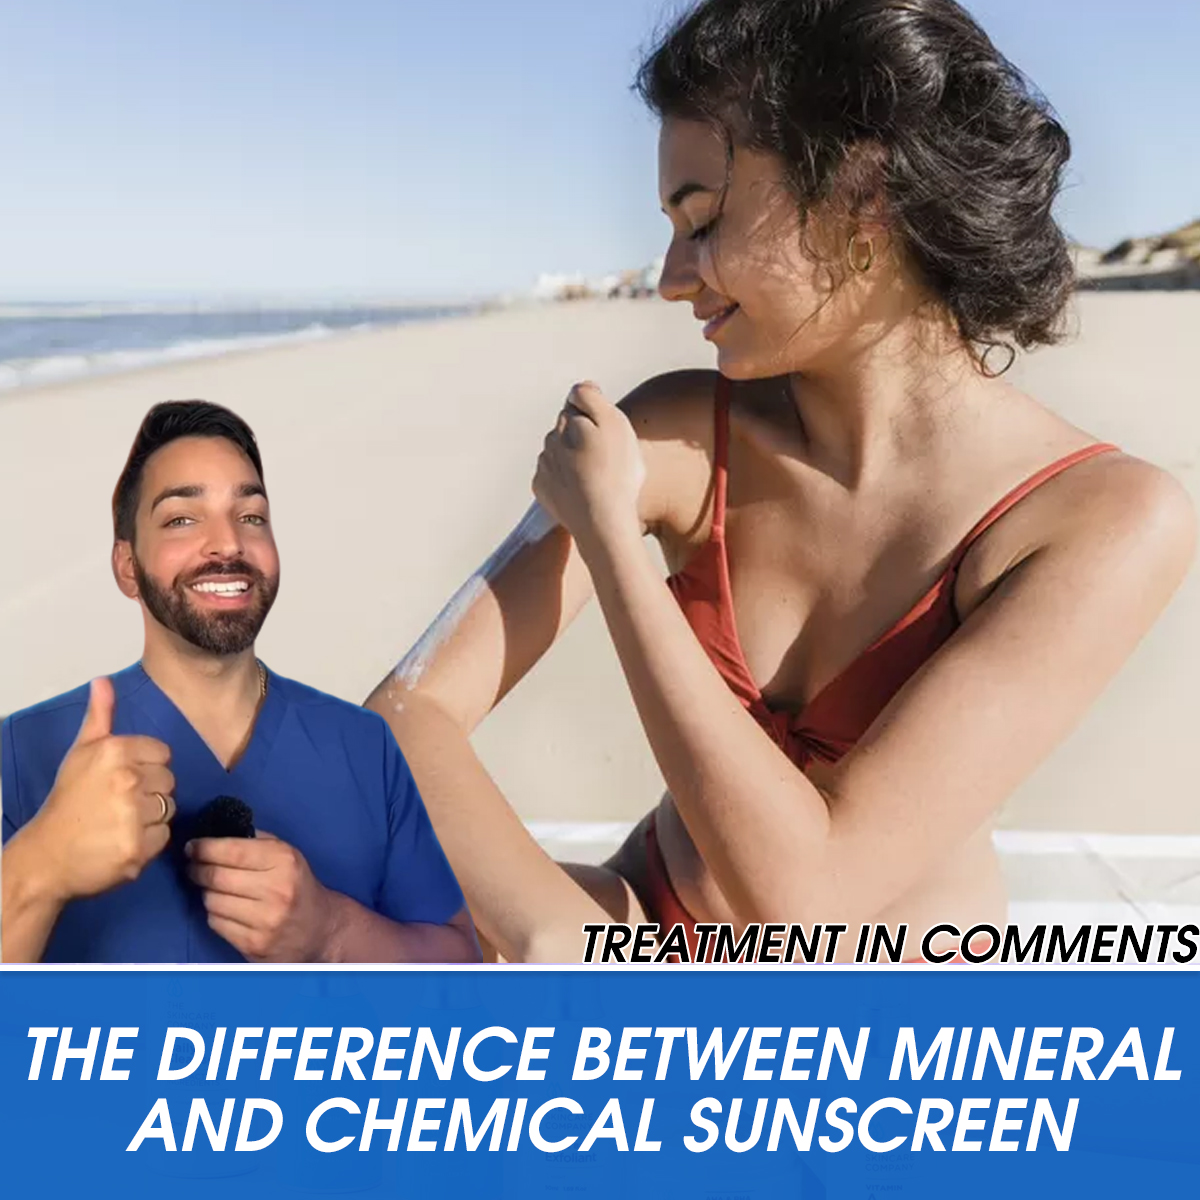 The Difference Between Mineral and Chemical Sunscreen